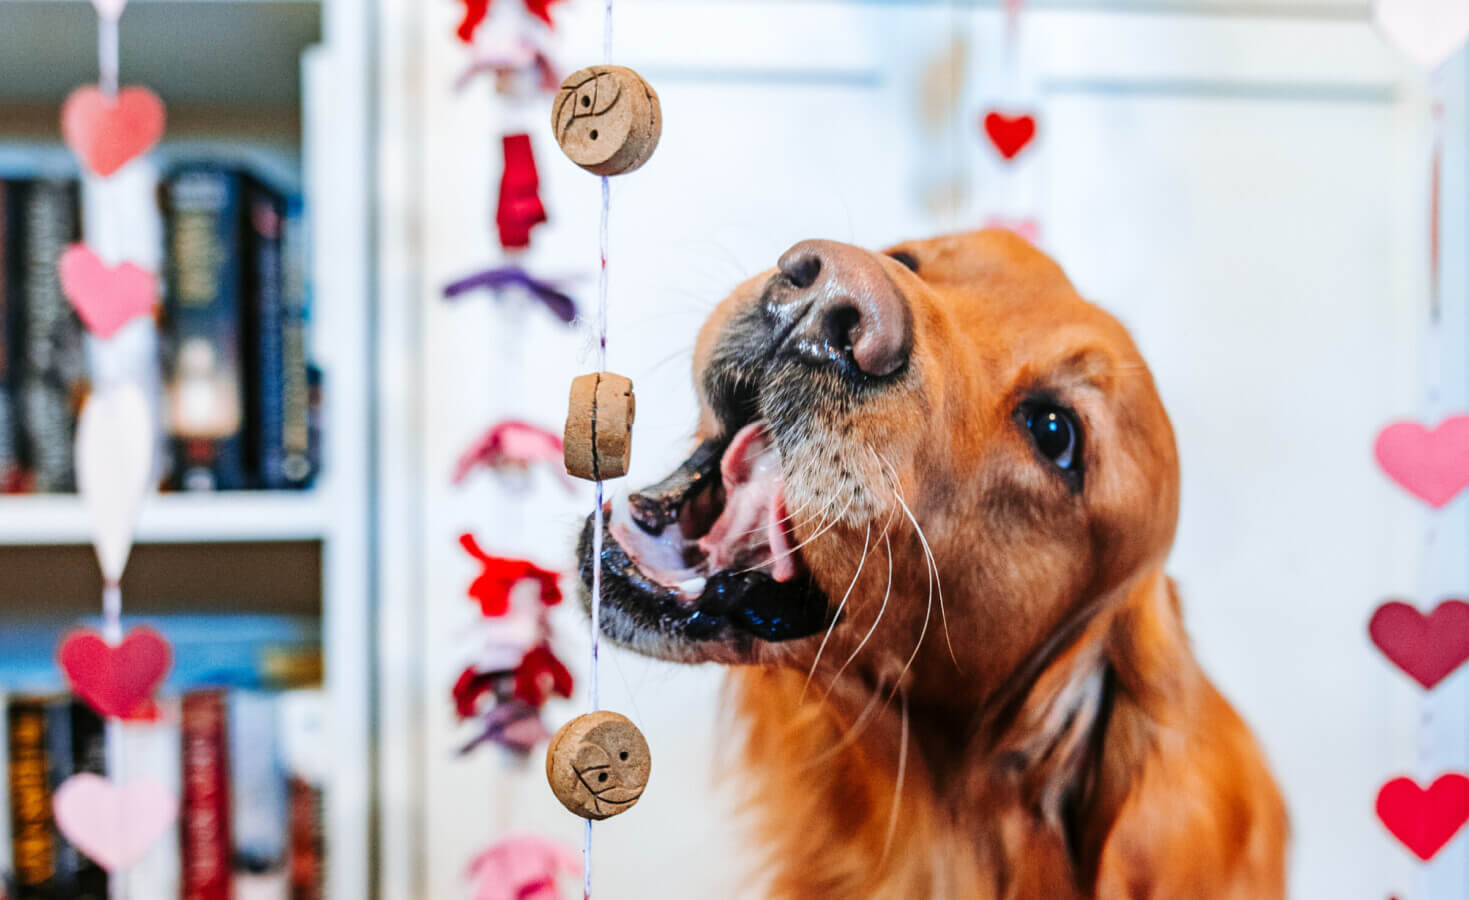 Dog opens mouth to grab treats hanging on string with hearts